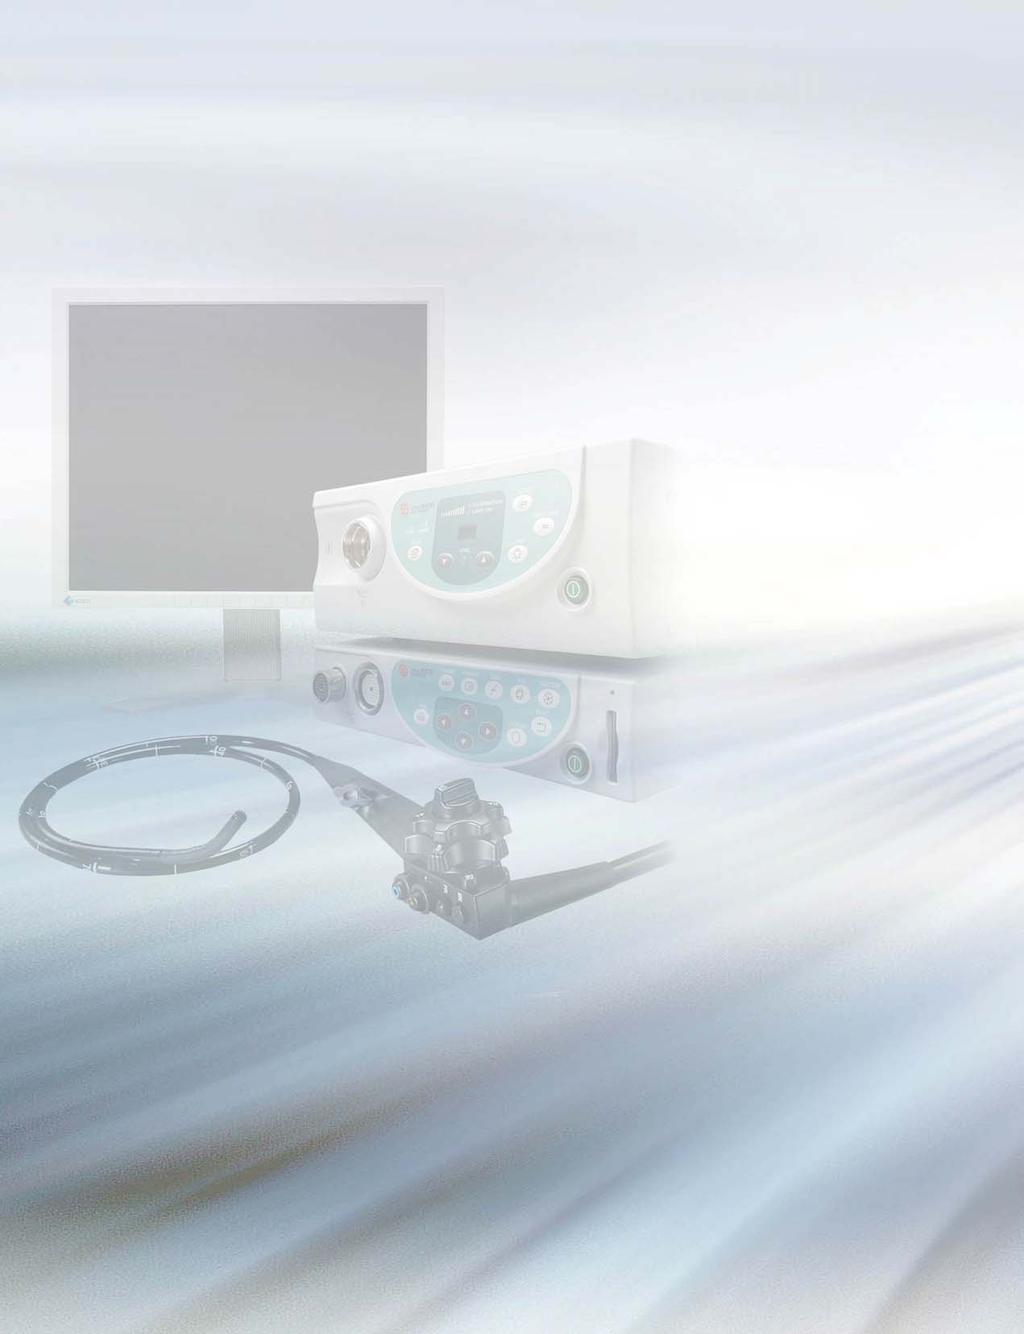 The next generation of endoscopic diagnosis has arrived with Fujinon's new EP